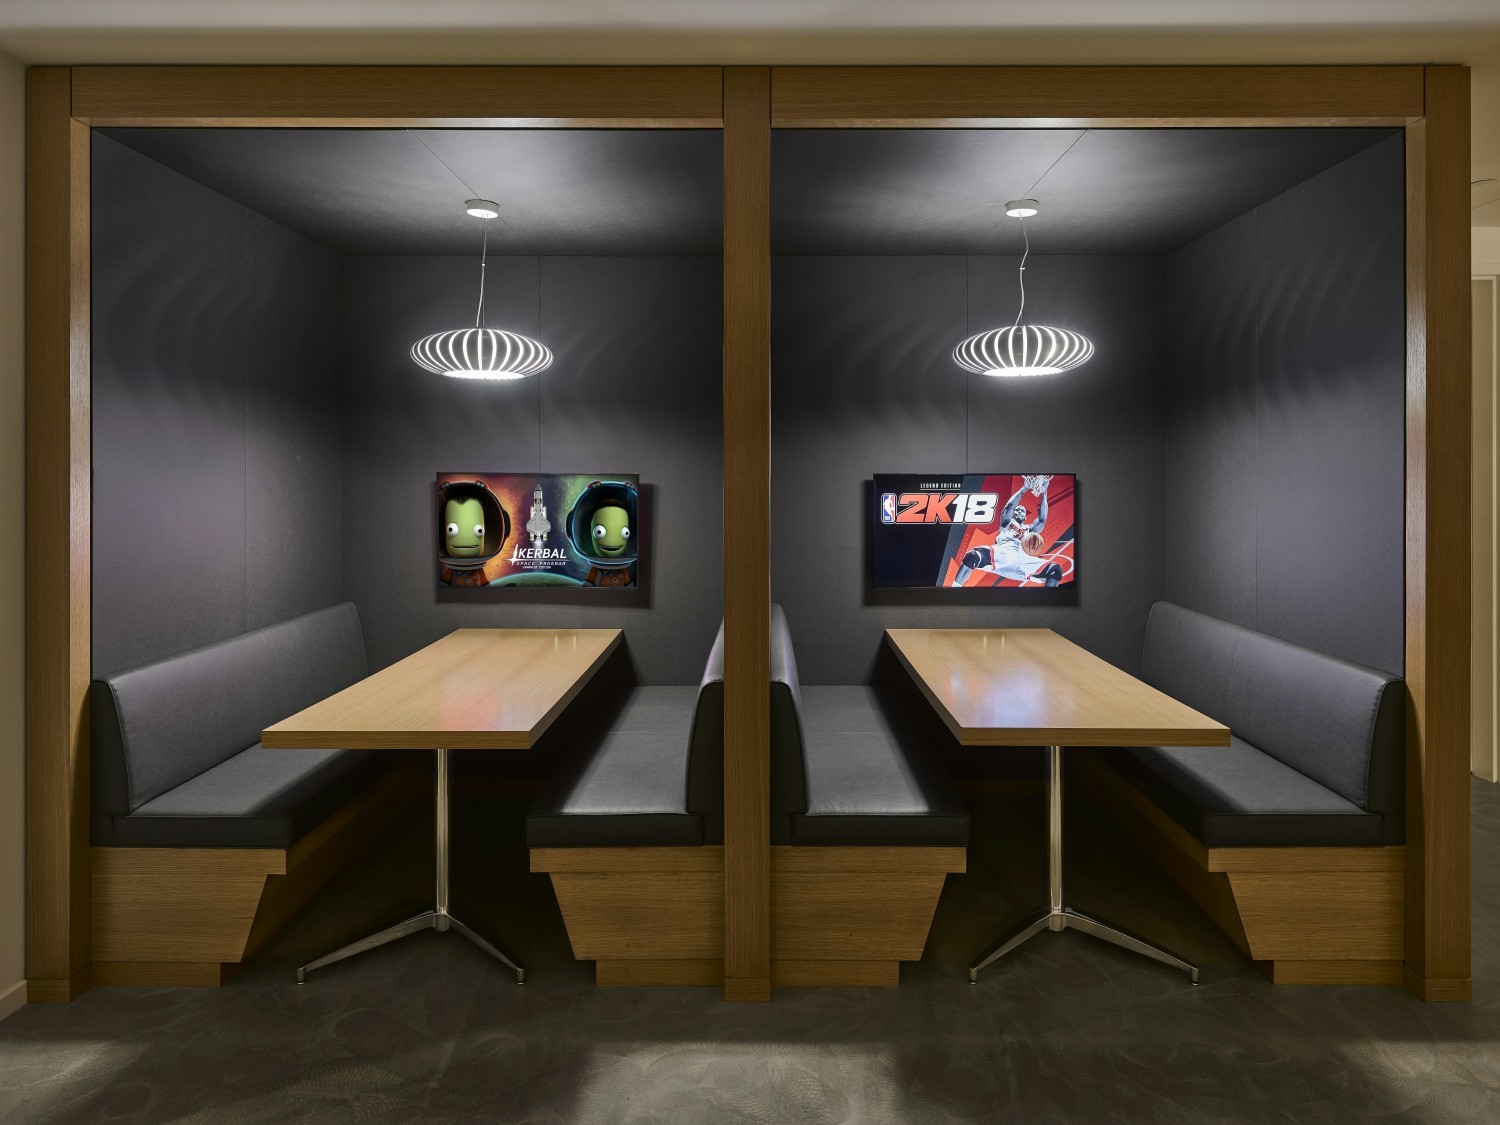 Informal huddle spaces at Take-Two's headquarters in New York City.